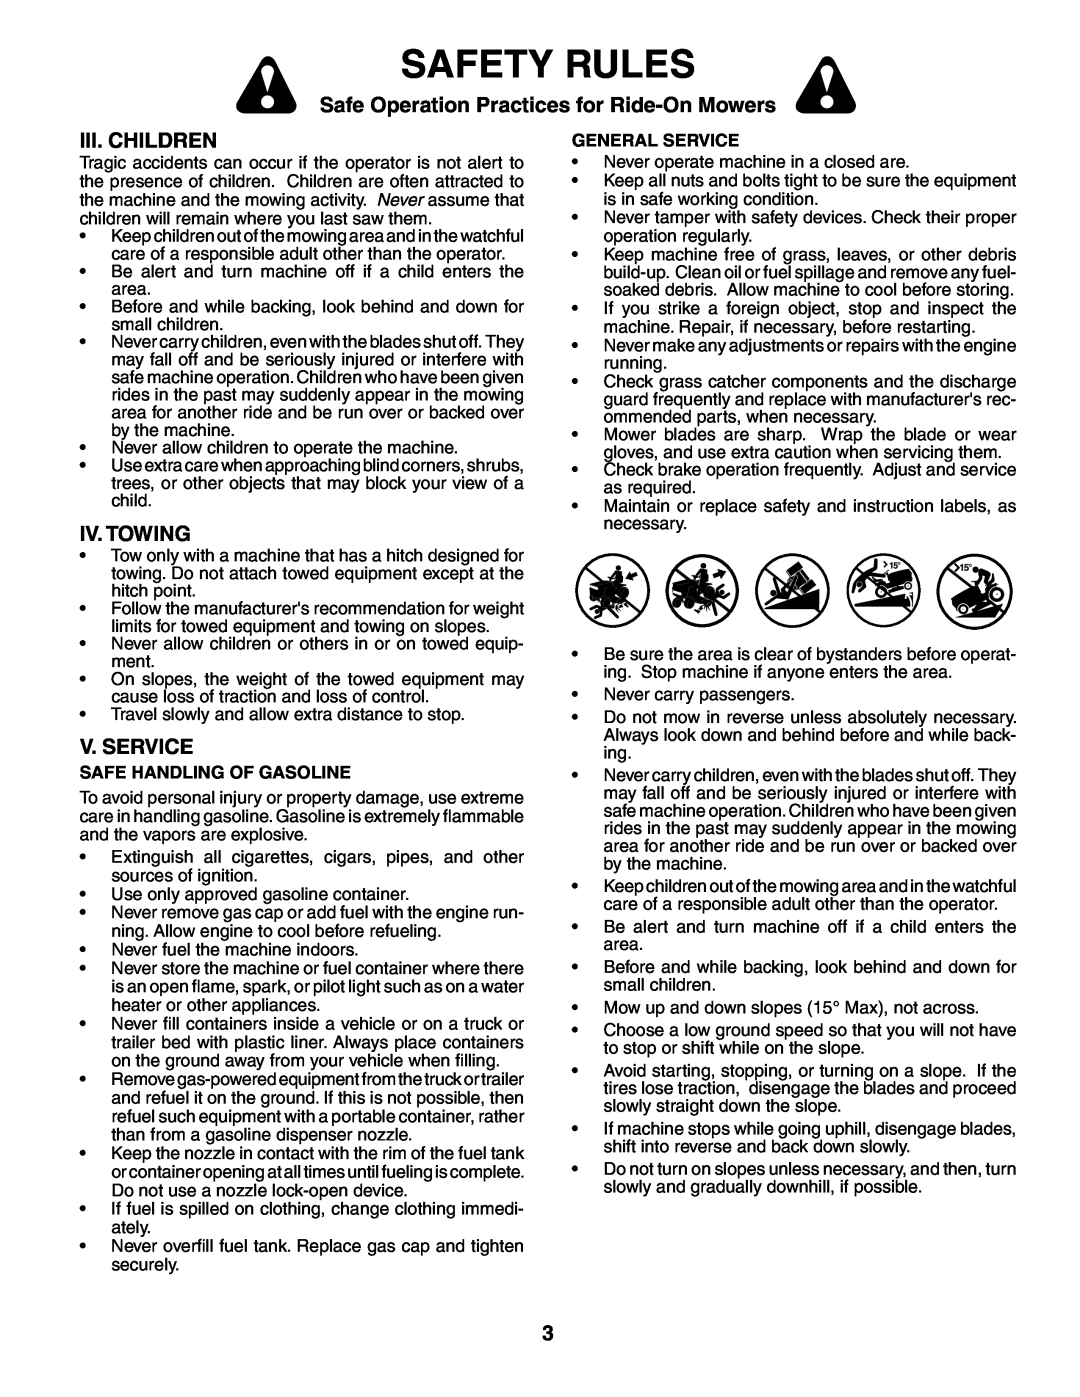 Poulan DB24H42YT manual Iii. Children, Iv. Towing, V. Service, Safety Rules, Safe Operation Practices for Ride-On Mowers 